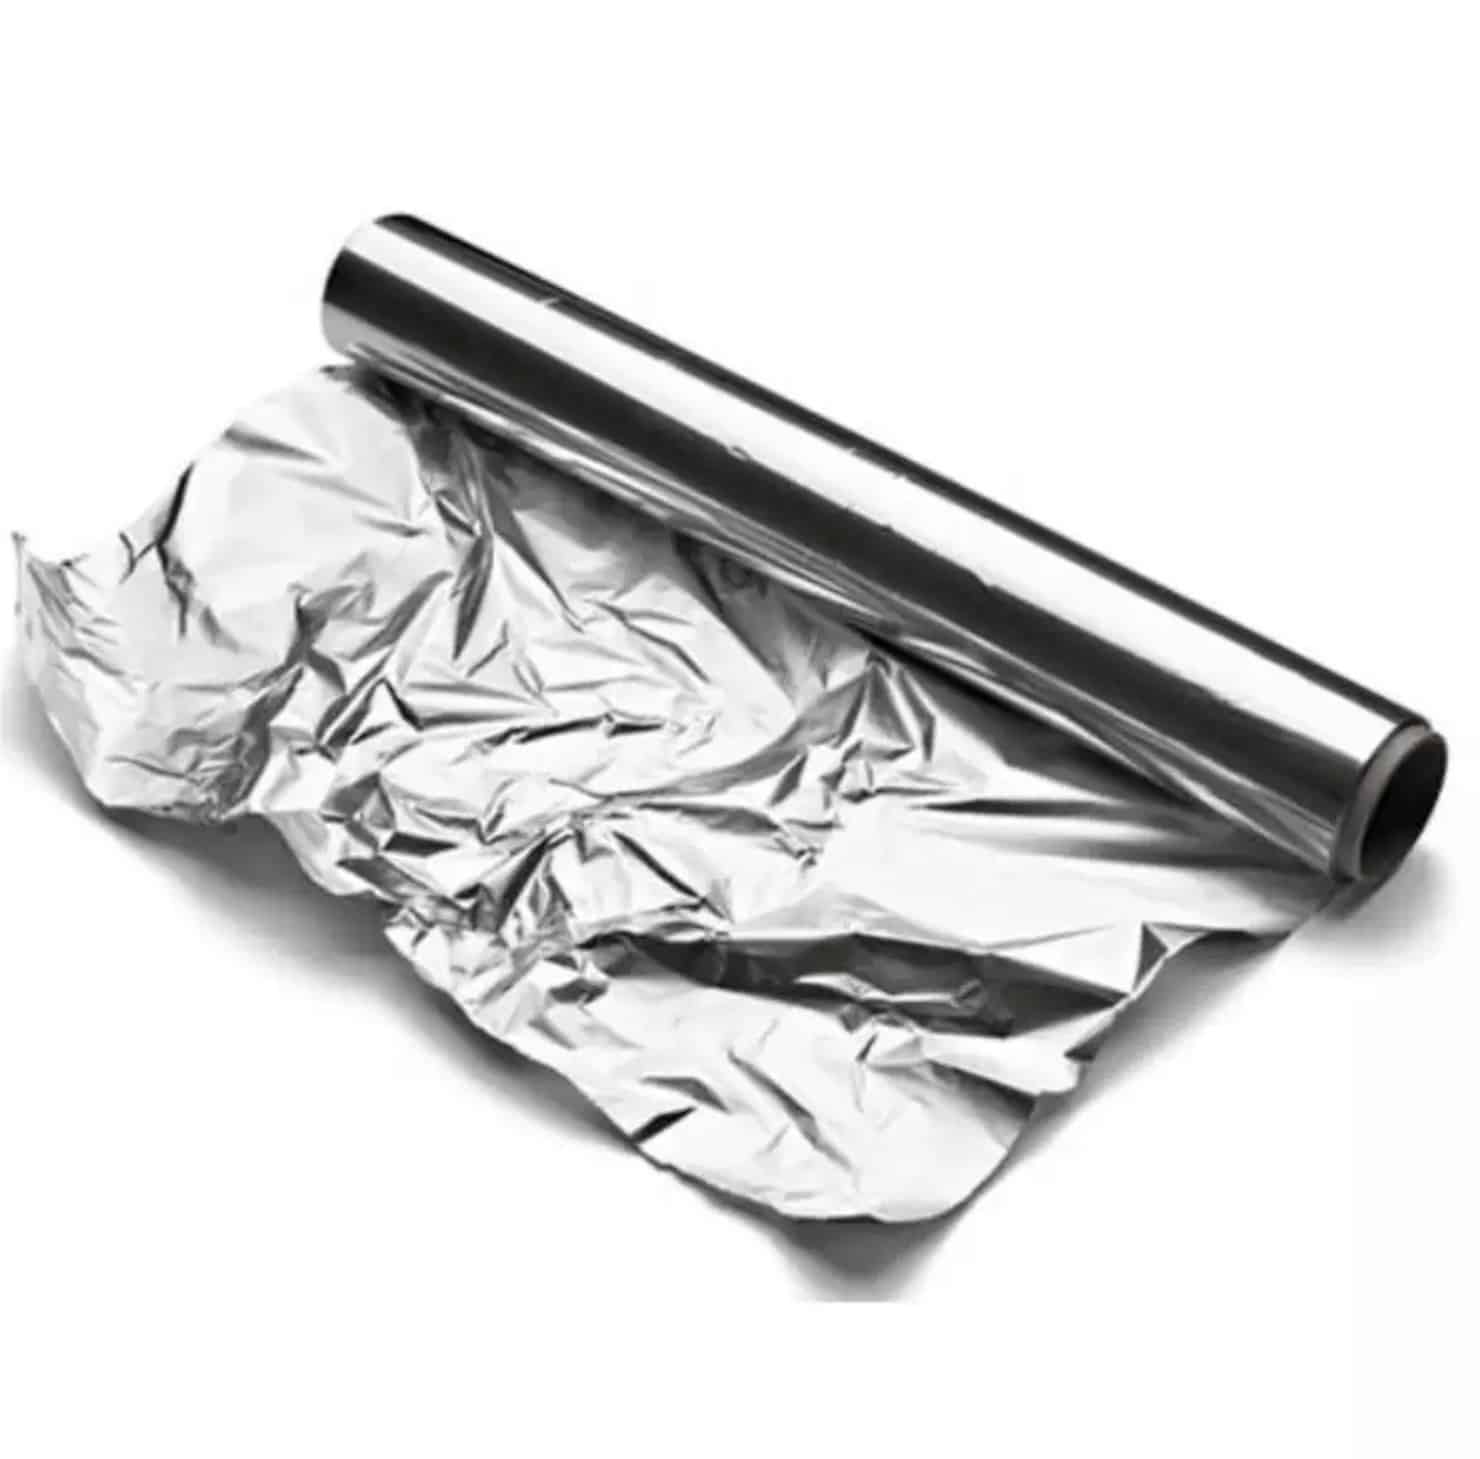 Are You Searching for Top Aluminum Foil Manufacturers in UAE?